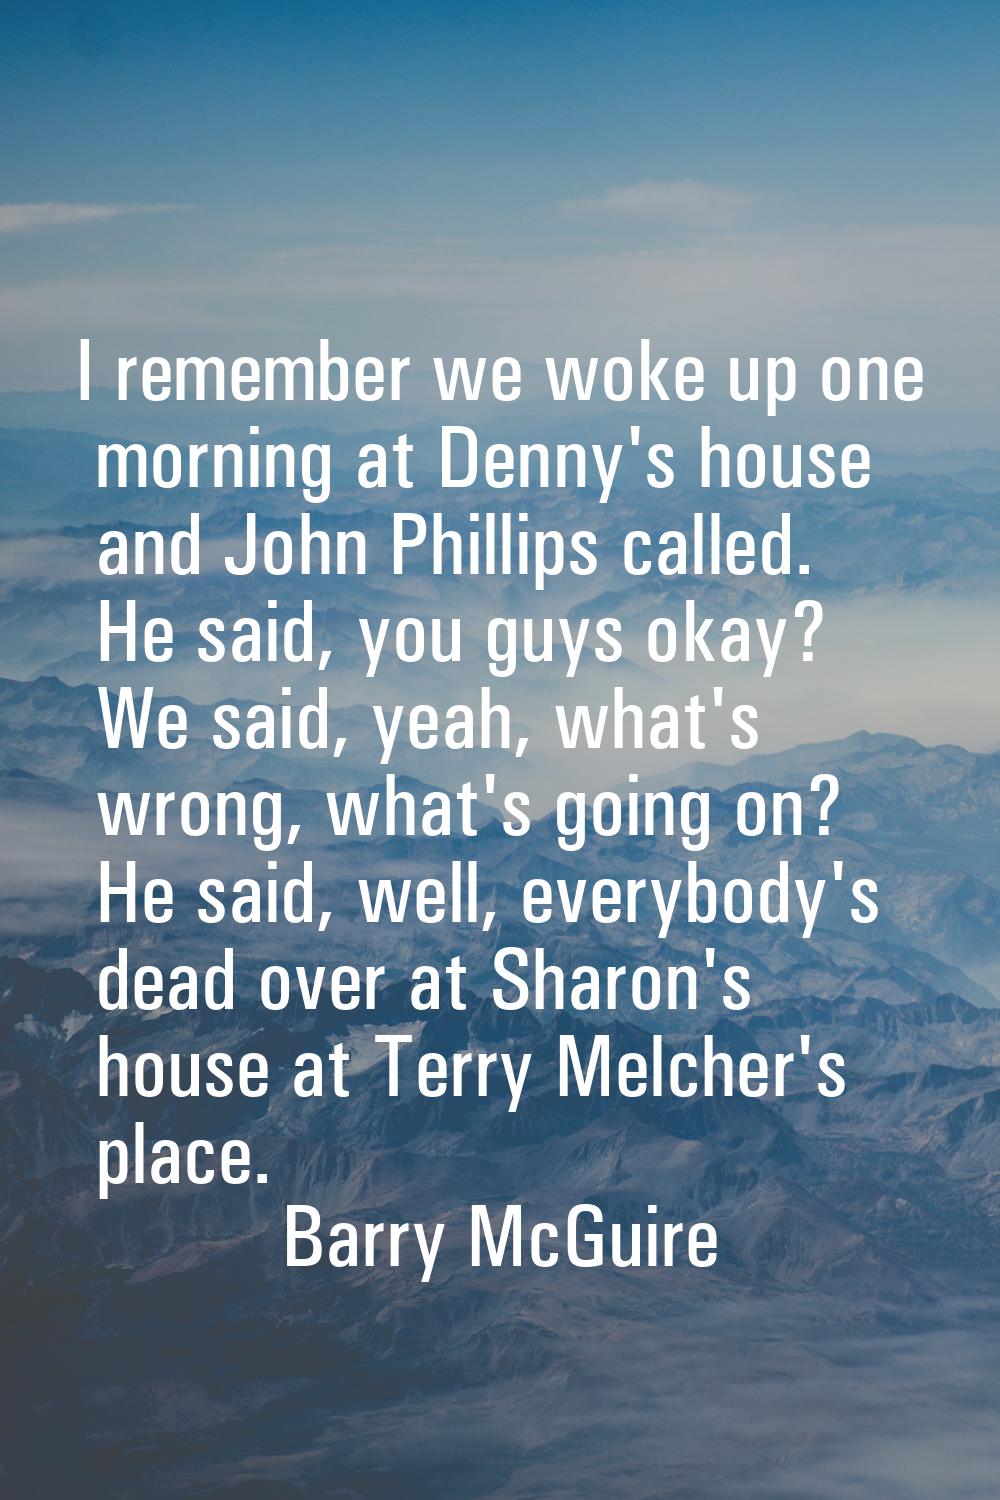 I remember we woke up one morning at Denny's house and John Phillips called. He said, you guys okay